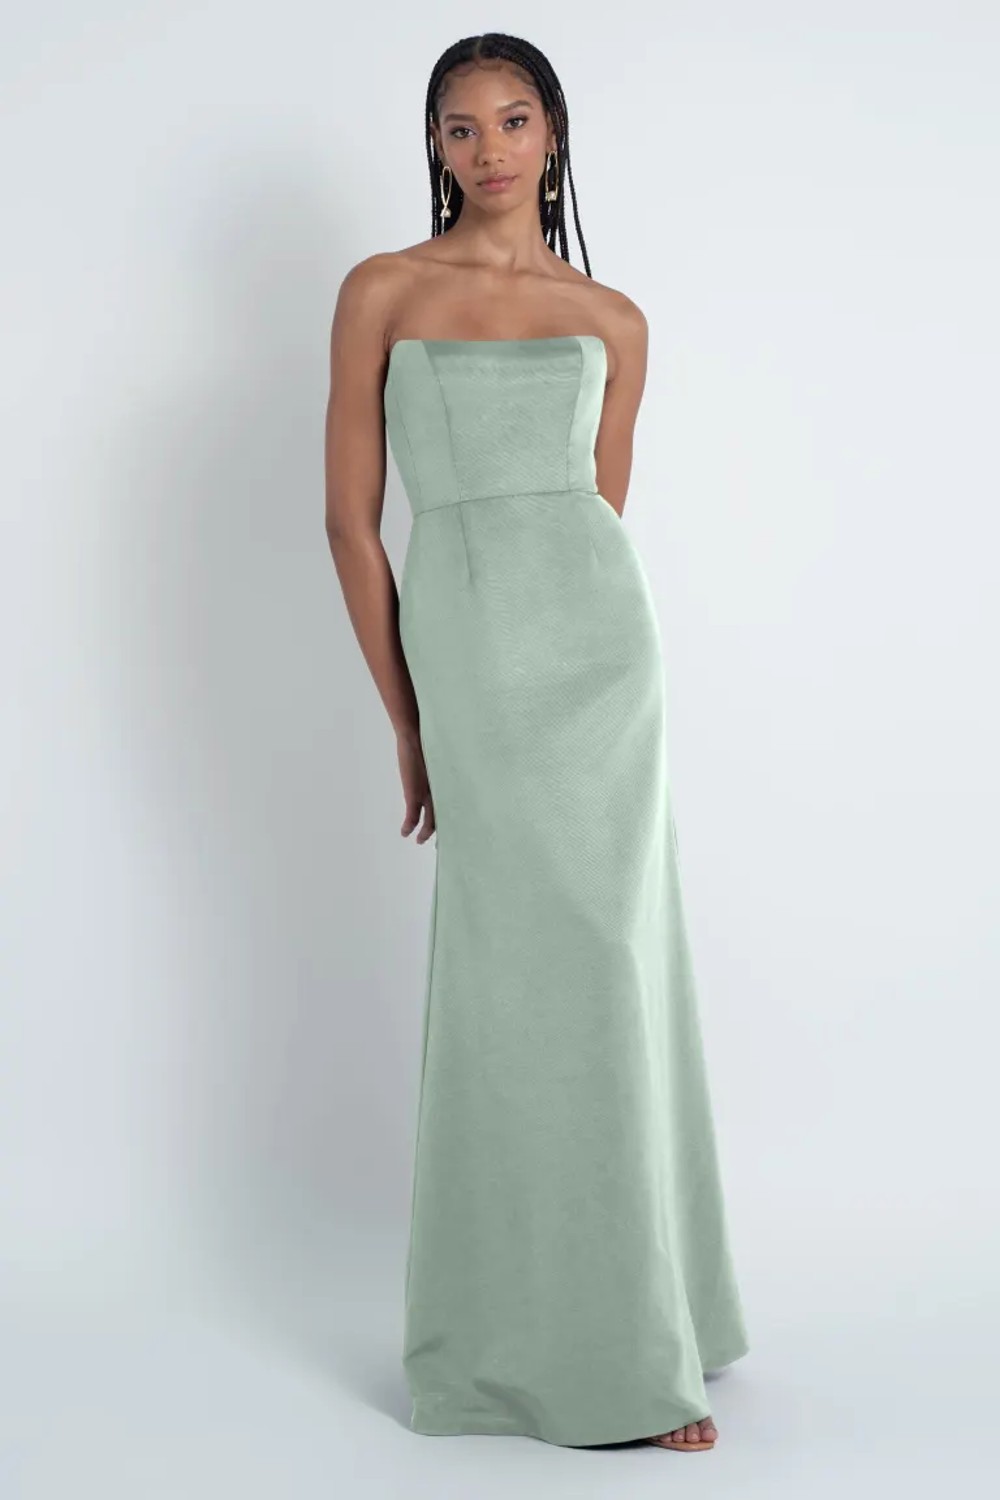 Try Before You Buy Paige Bridesmaid Dress by Jenny Yoo